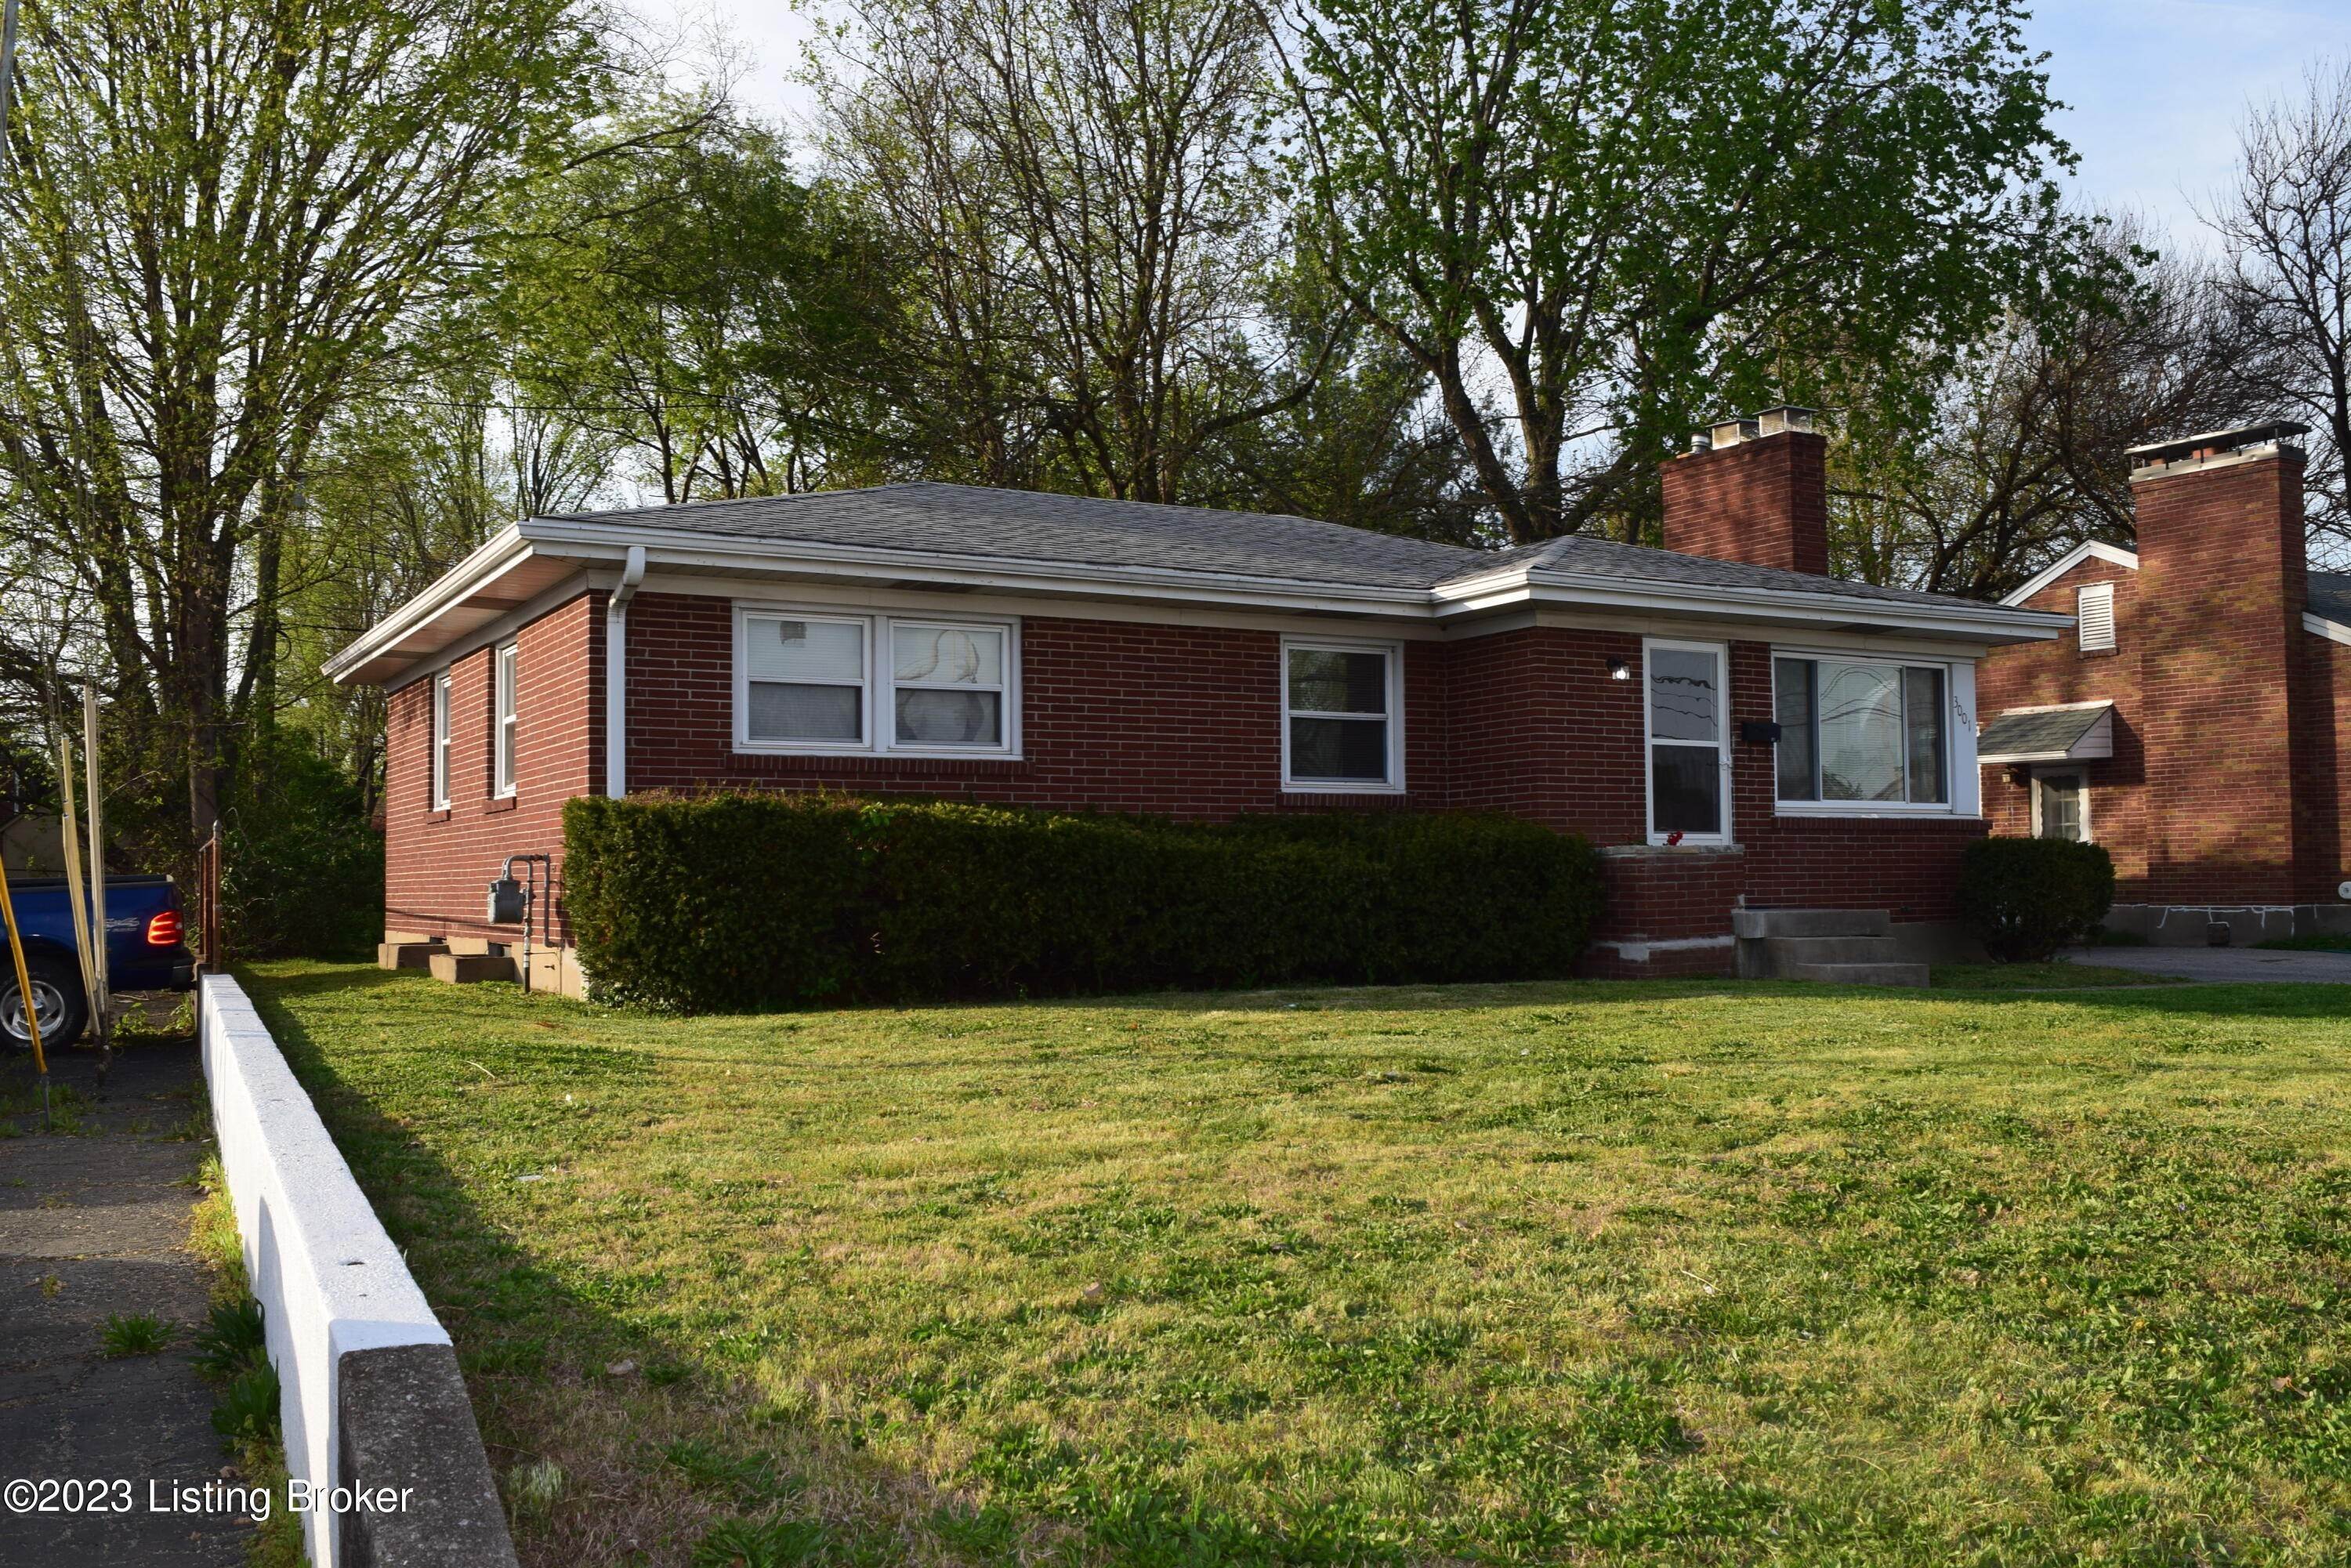 22. Single Family at Louisville, KY 40220